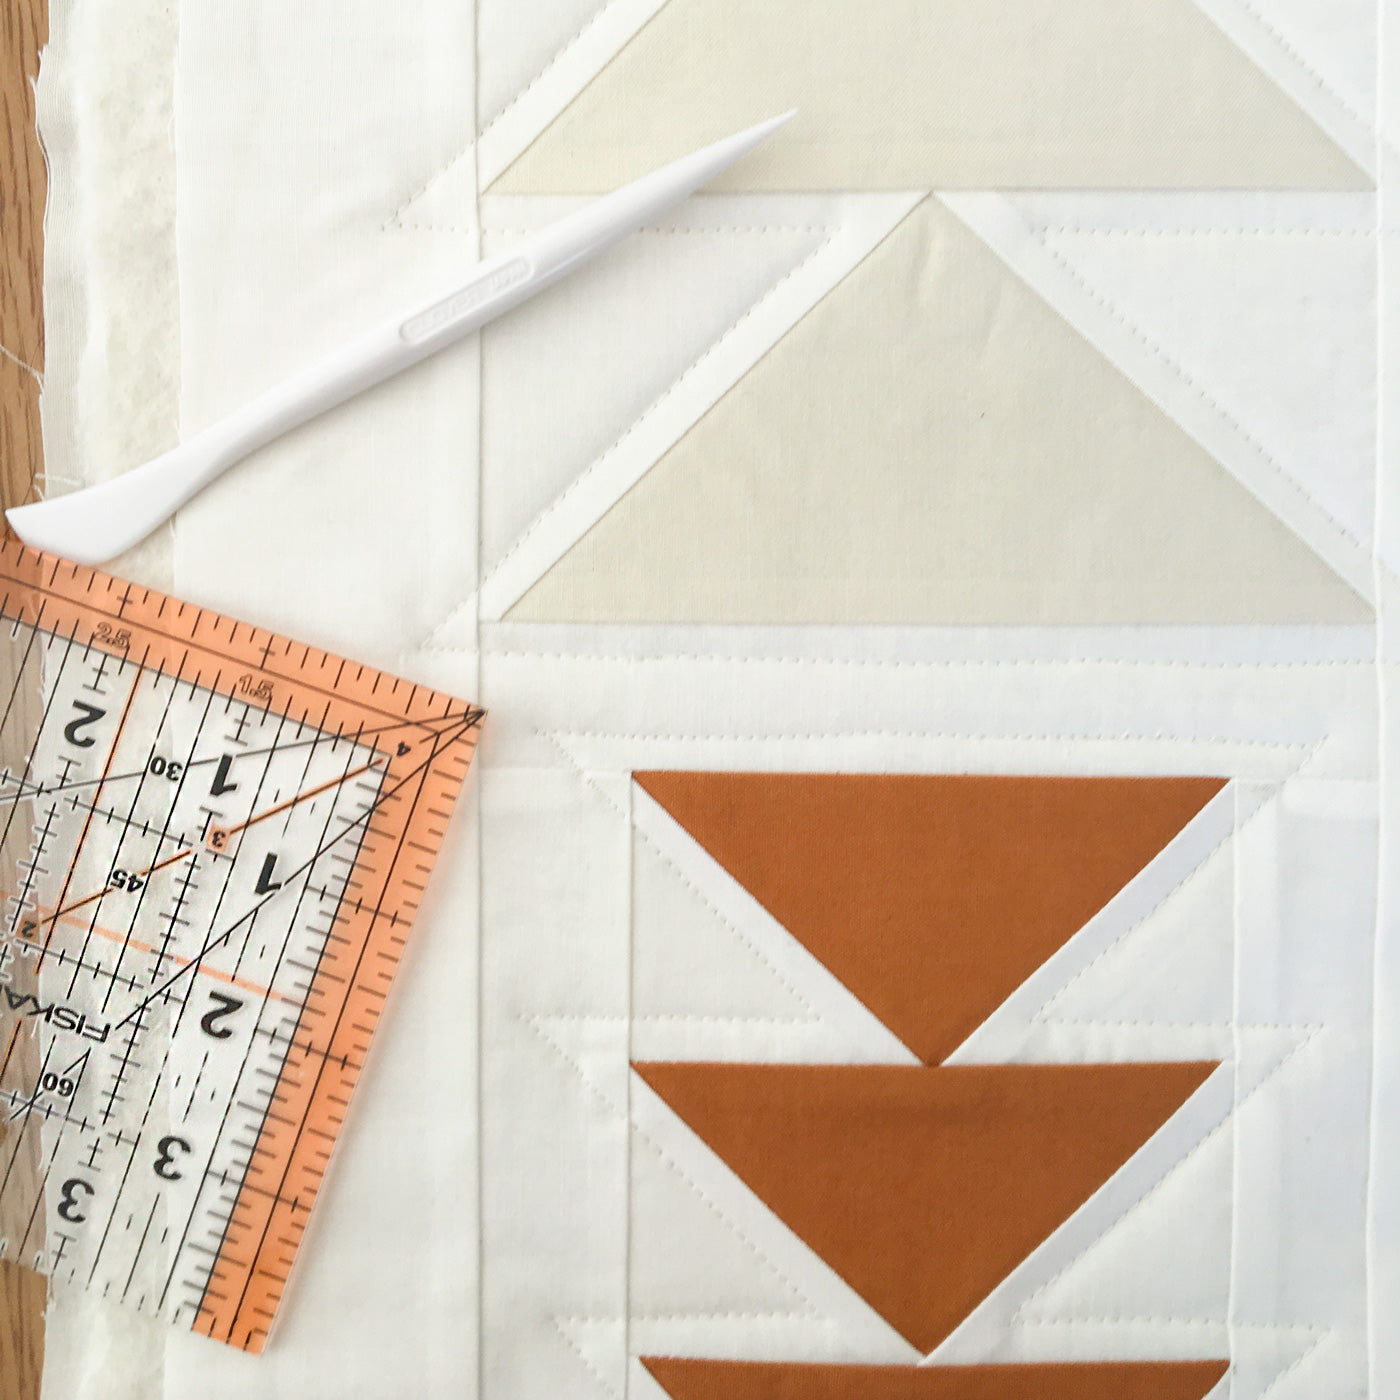 Using the hera marker by clover and ruler to mark quilting lines for straight line quilting